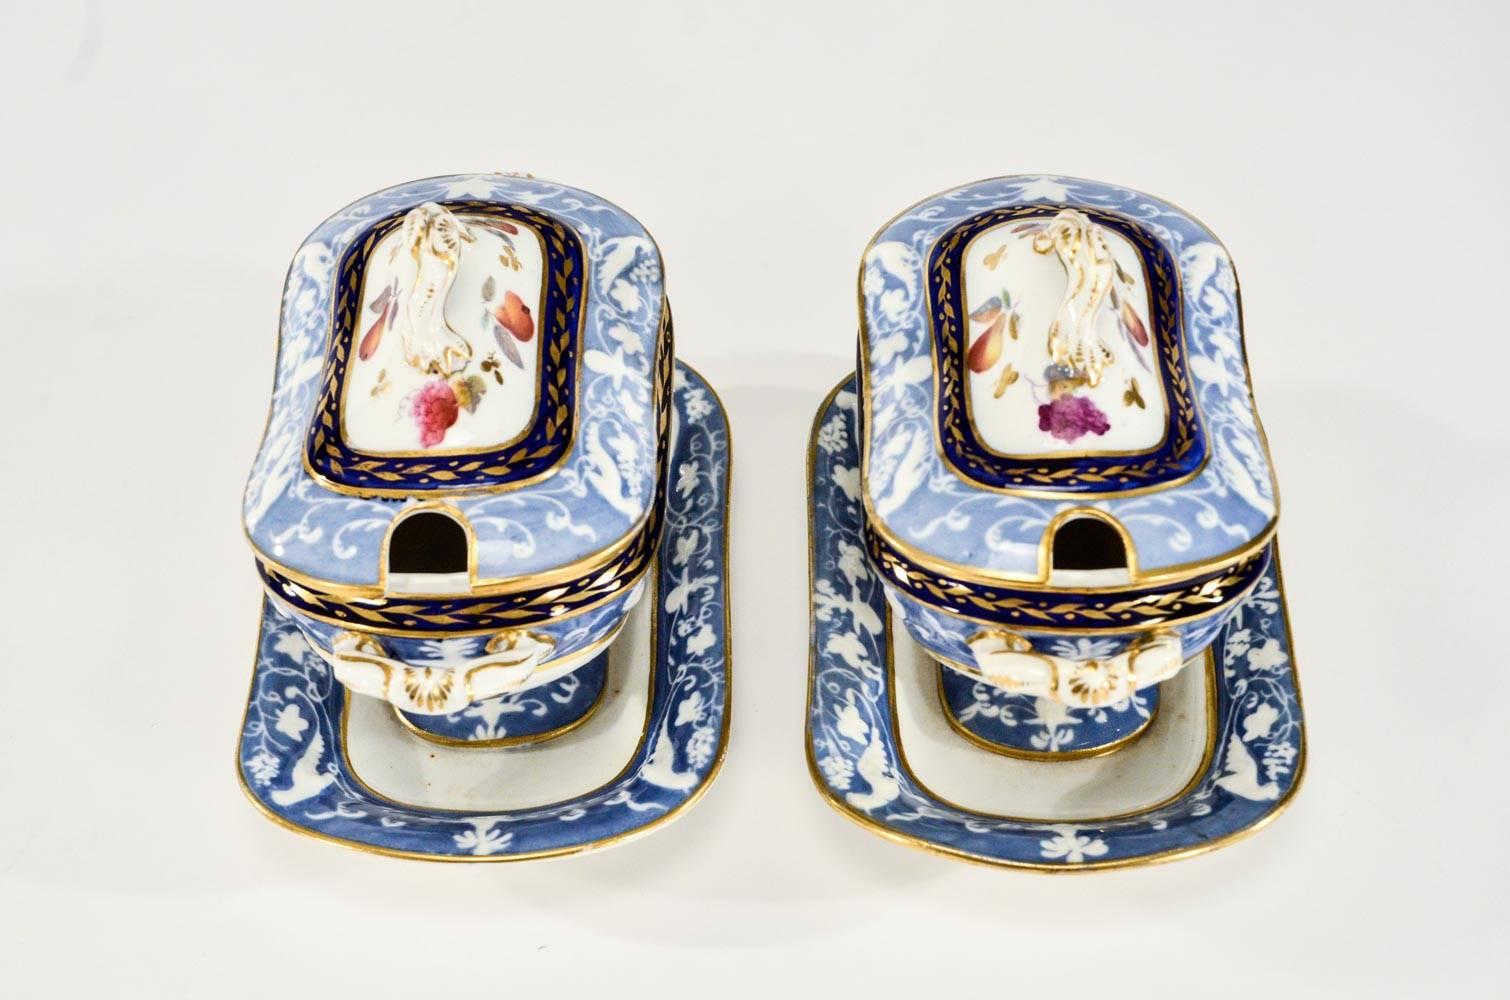 Pair of 19th Century Hand-Painted Spode Sauce Tureens For Sale 3